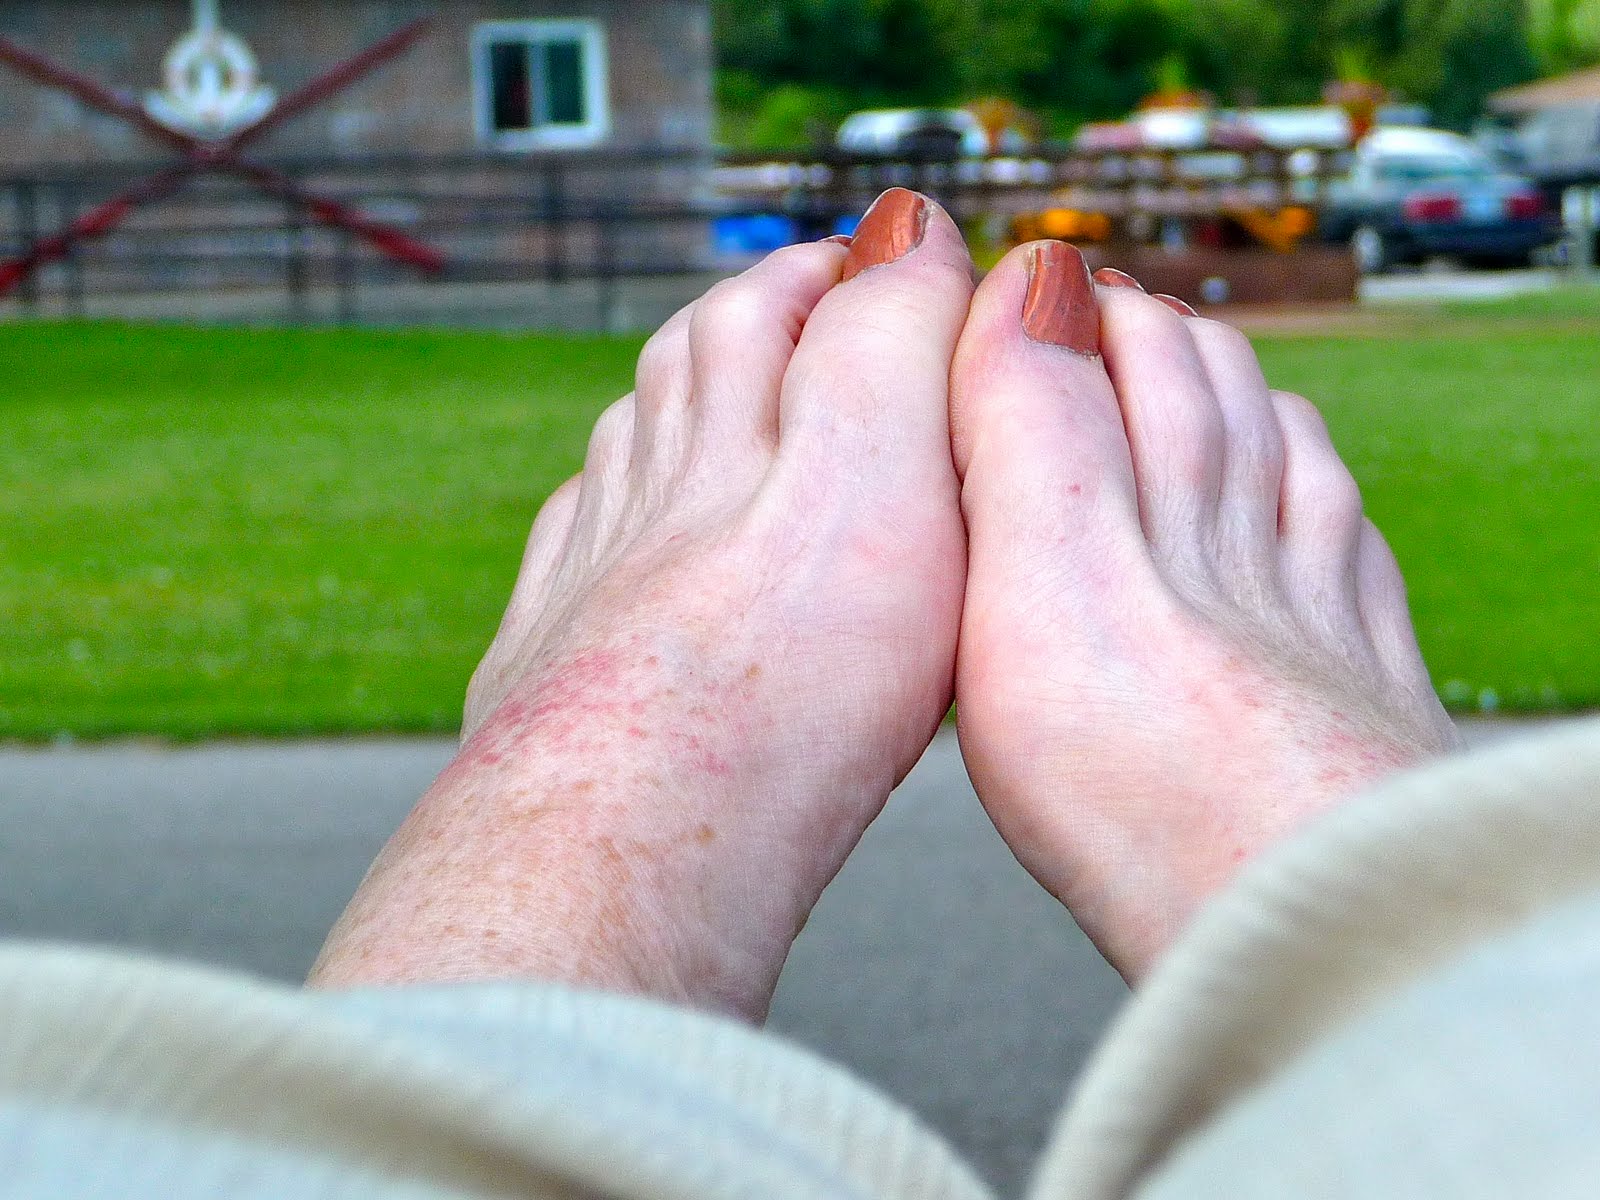 heat rash on foot pictures pictures, photos